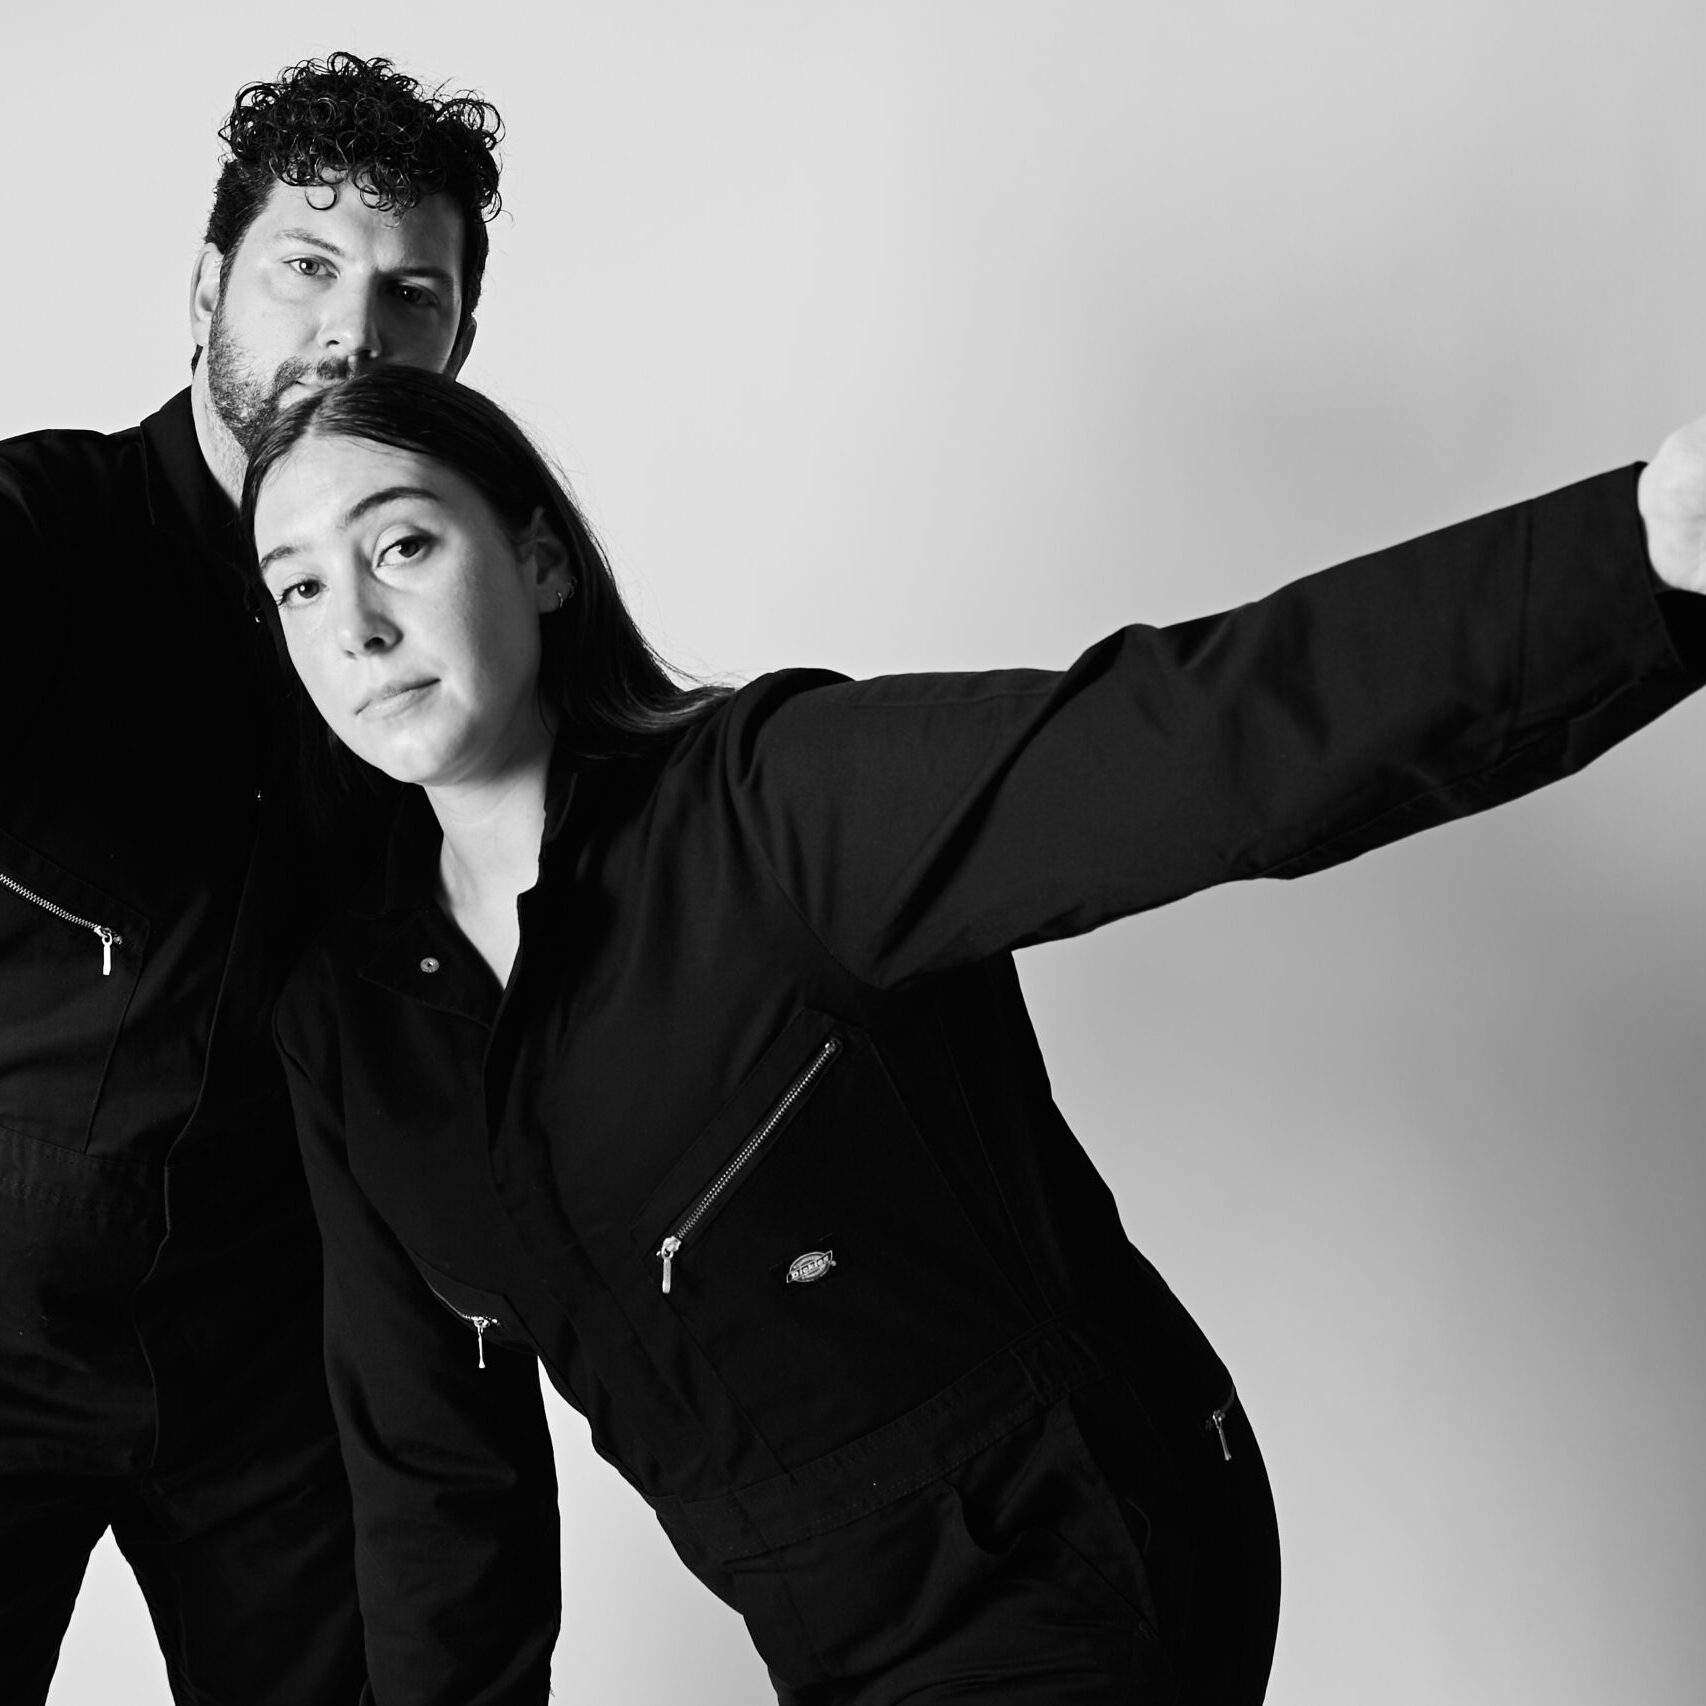 Black and white photo of two overlapping bodies in black jumpsuits against a white background. Nattie is leaning forward with long dark hair and one arm extended in a long line to the side, Hollis is behind her more upright with curly dark hair and one arm bent forward.